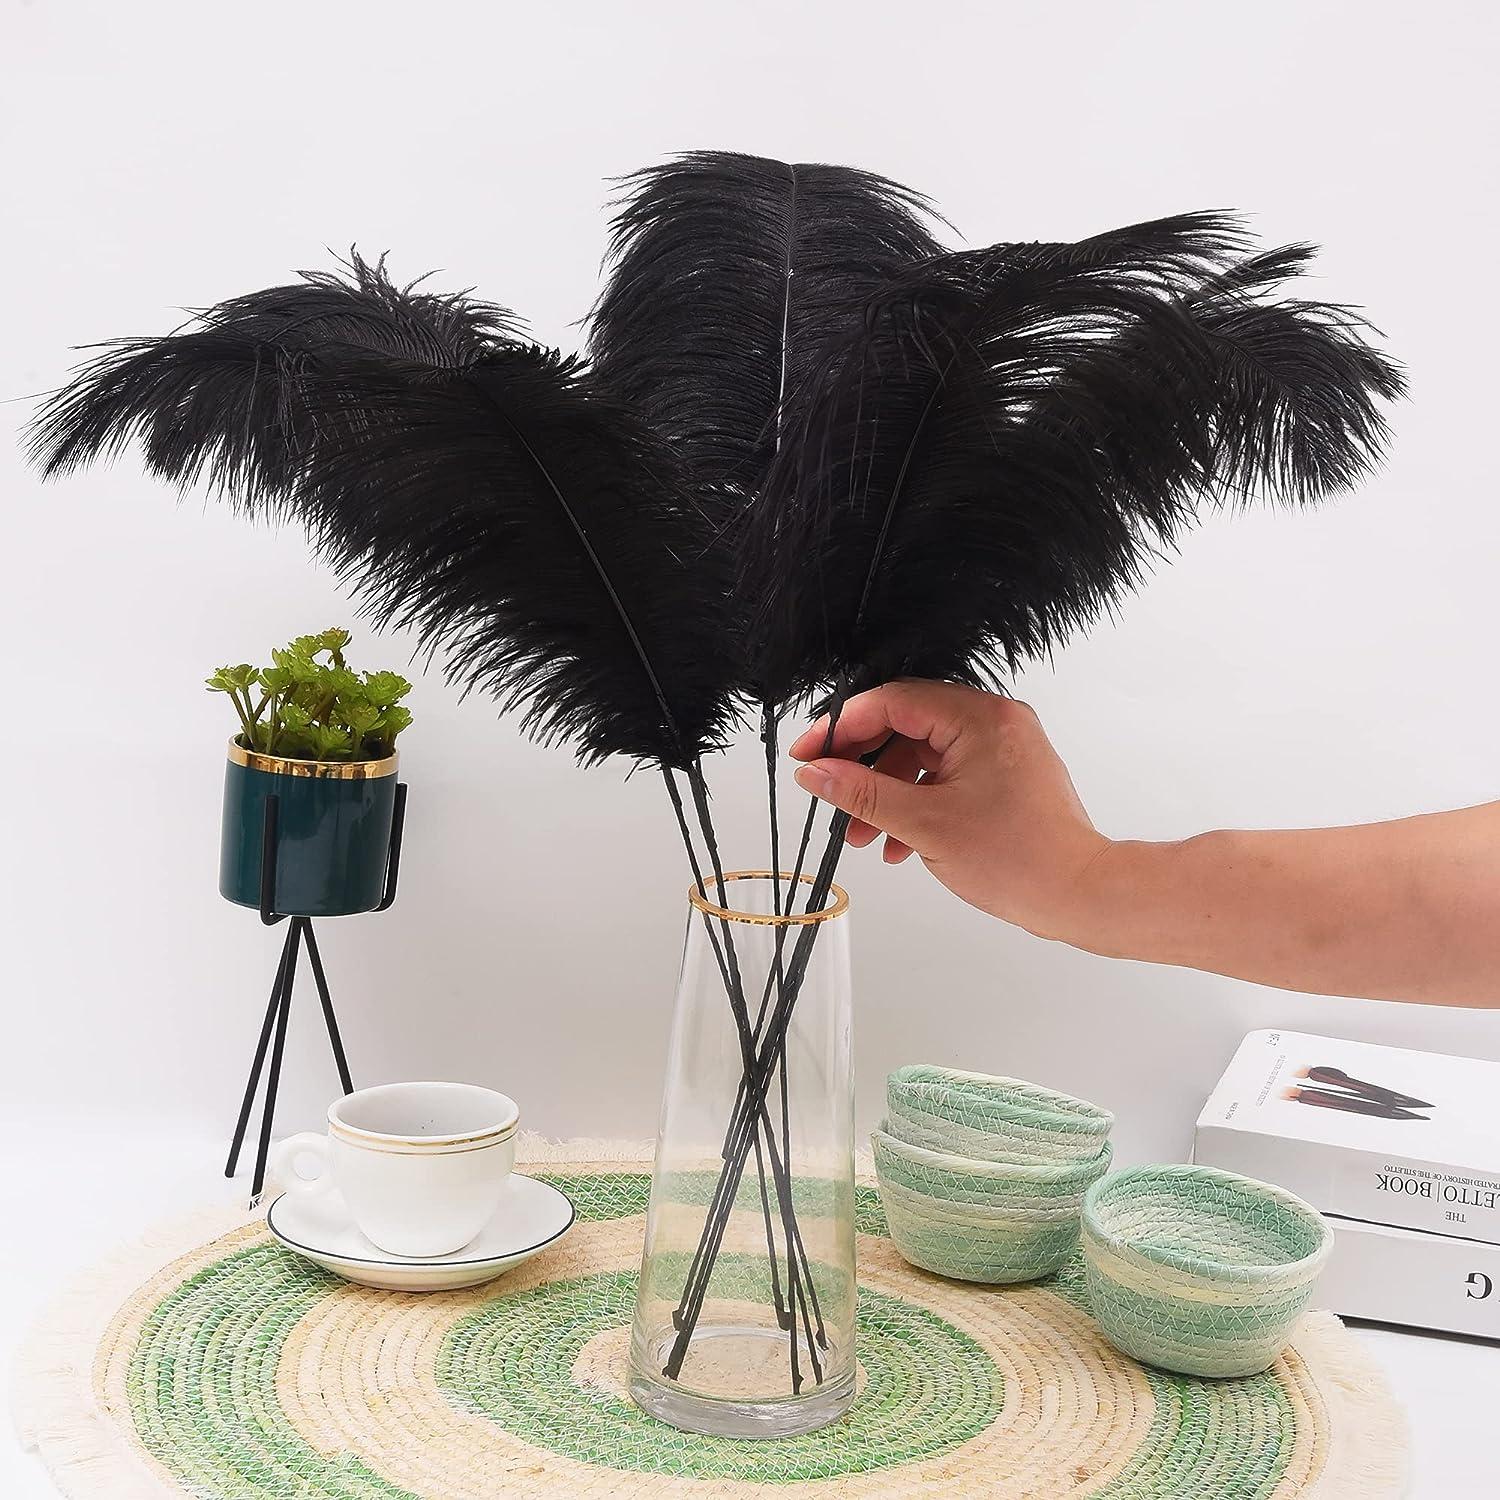 Ballinger Black Large Ostrich Feathers - 12pcs 24-26inch Feathers Making  Kit Ostrich Feathers Bulk for Vase,Wedding Centerpieces,Gatsby Party and  Home